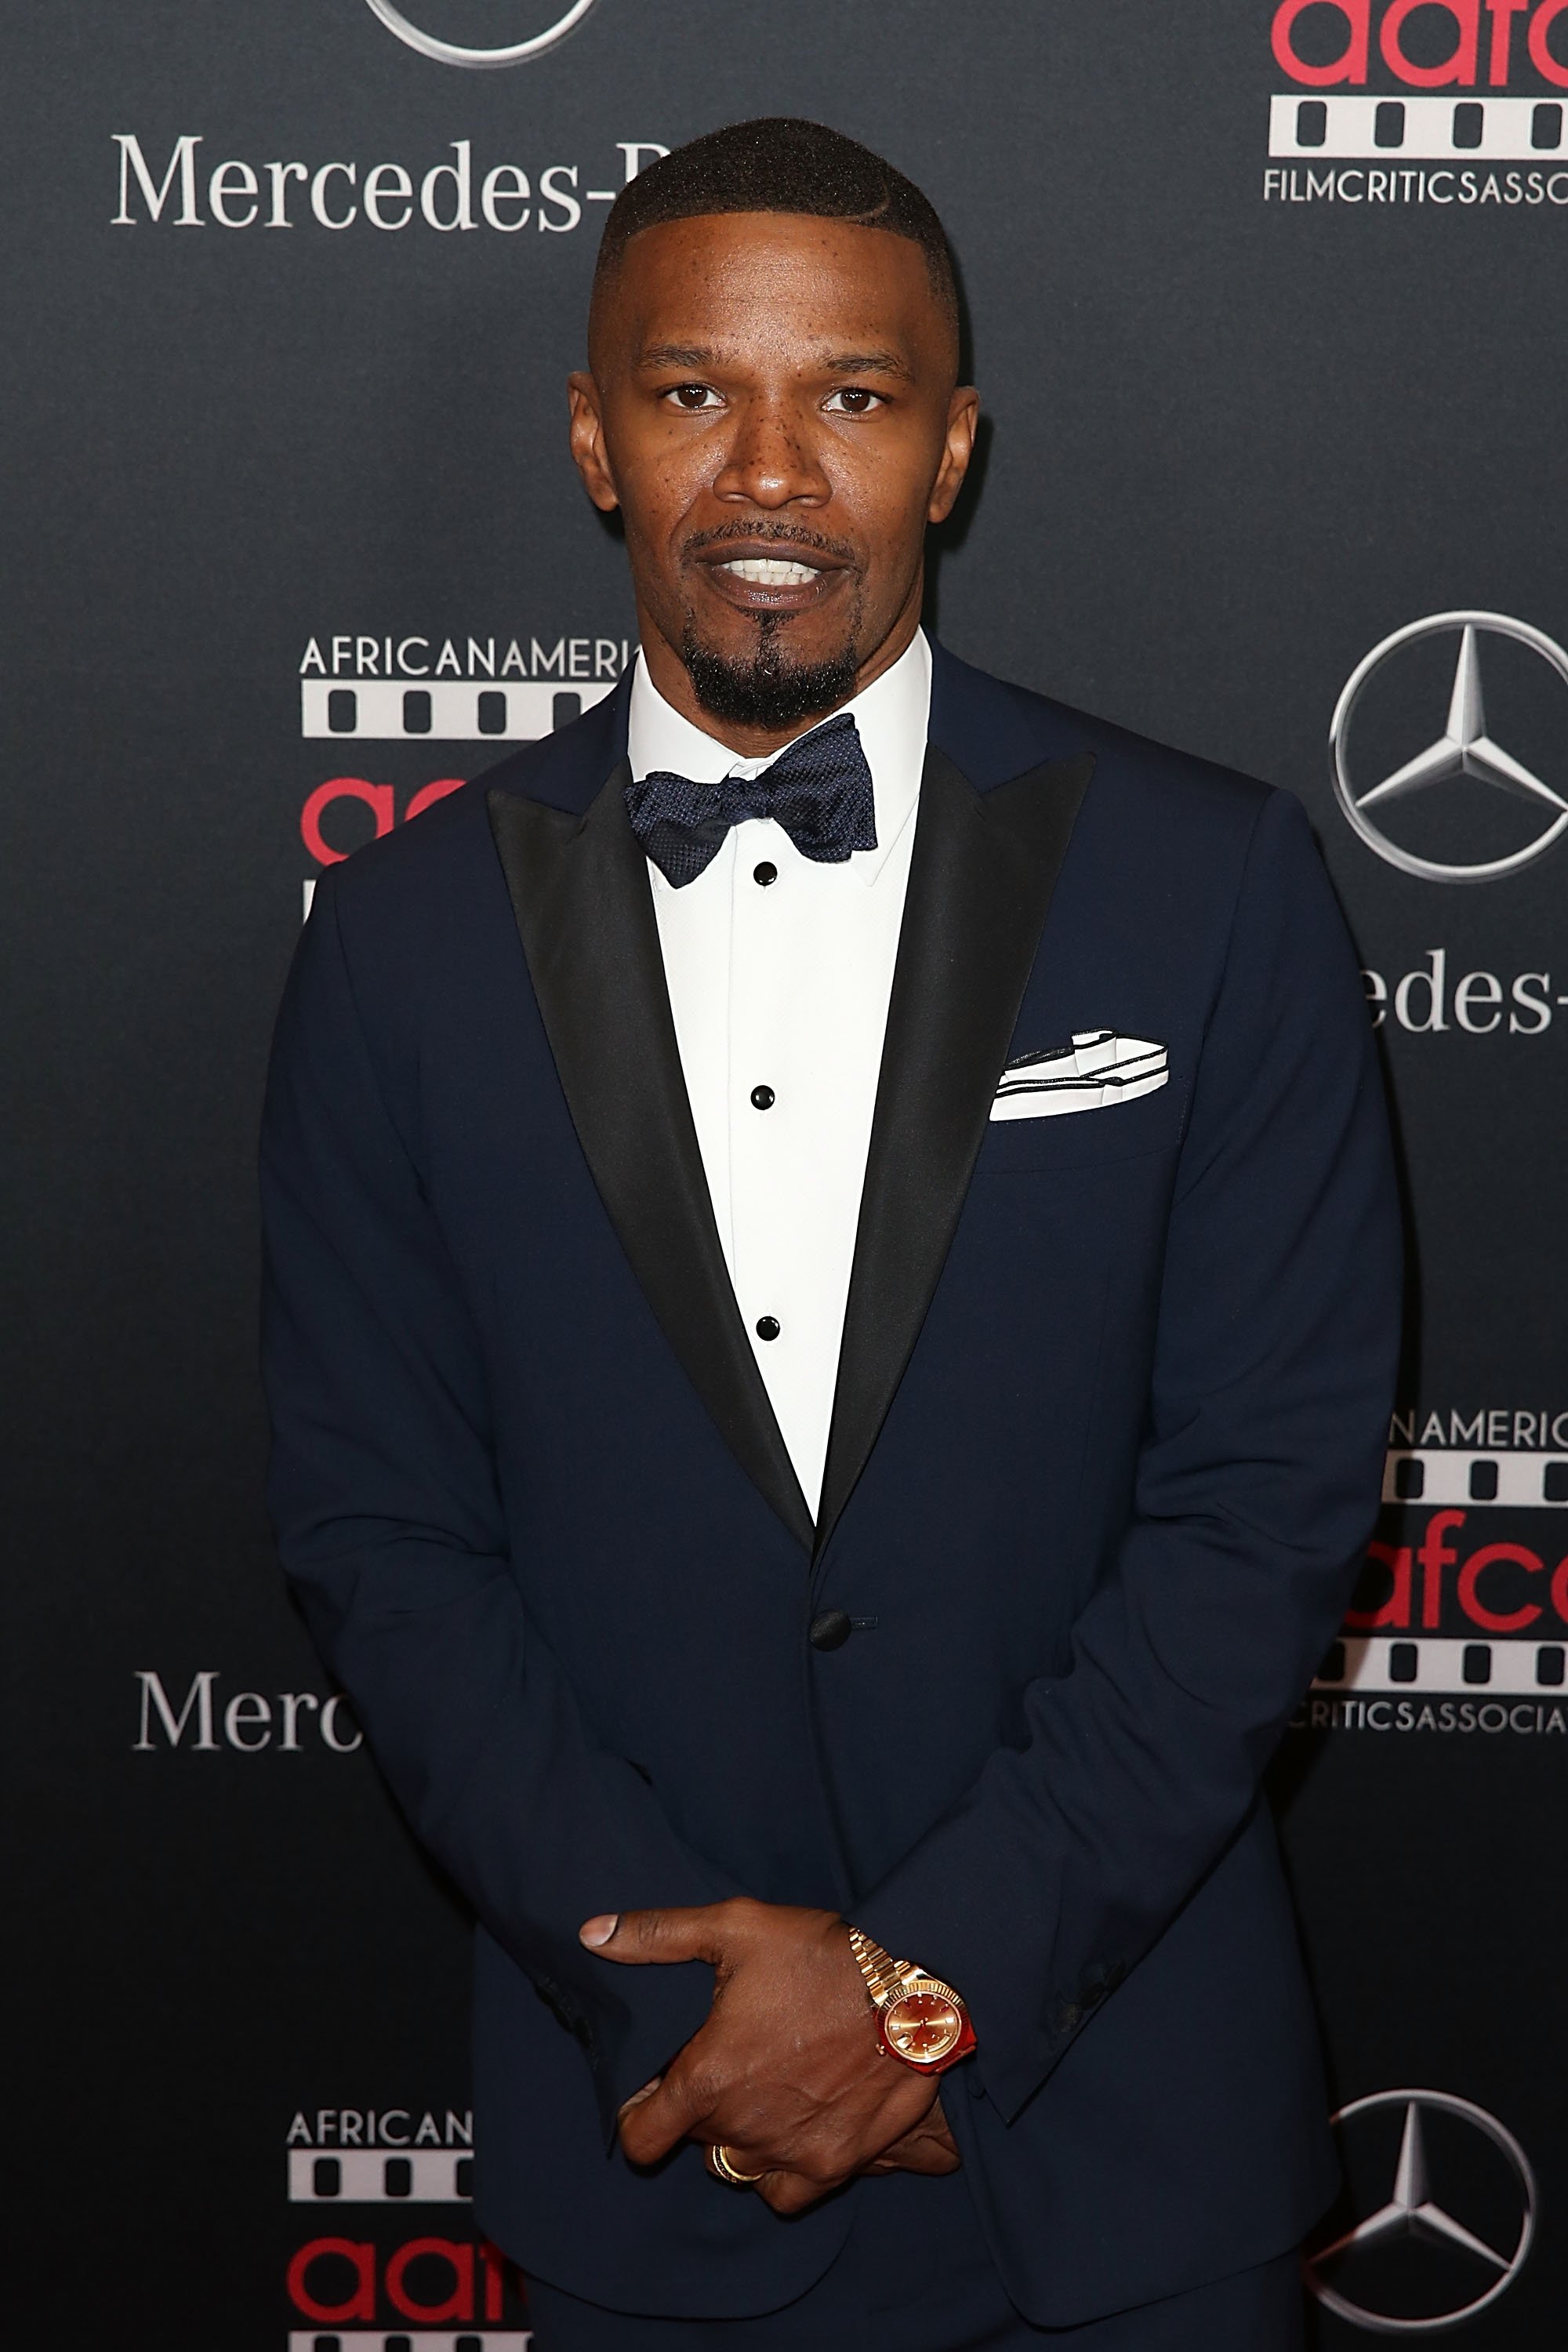 Jamie Foxx attends the Mercedes-Benz and African American Film Critics Association Oscar viewing party in Los Angeles, California on February 28, 2016 | Photo: Getty Images